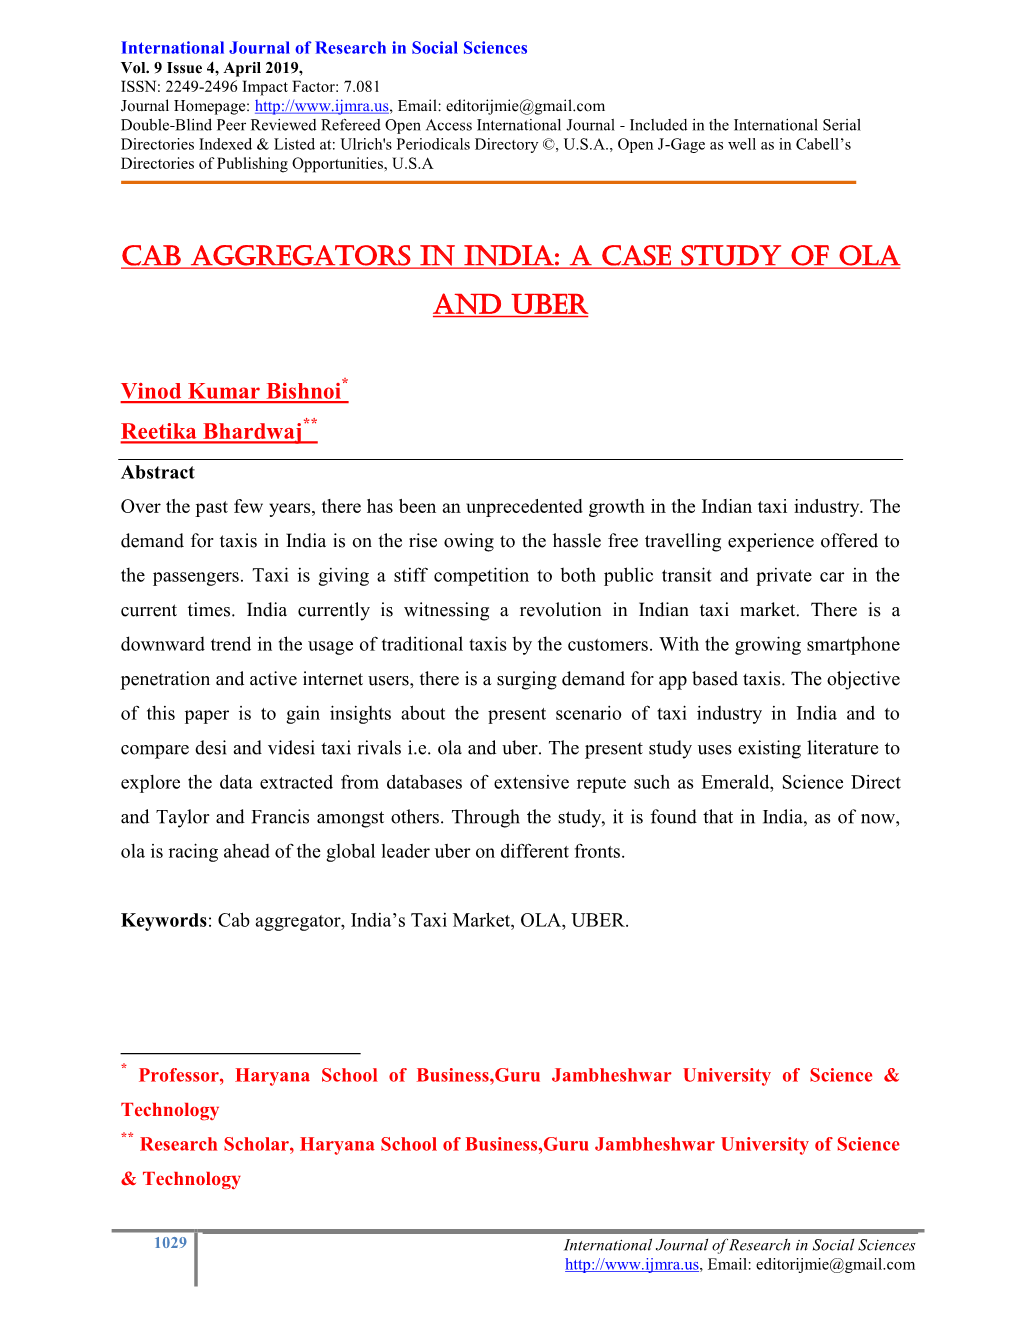 Cab Aggregators in India: a Case Study of Ola and Uber